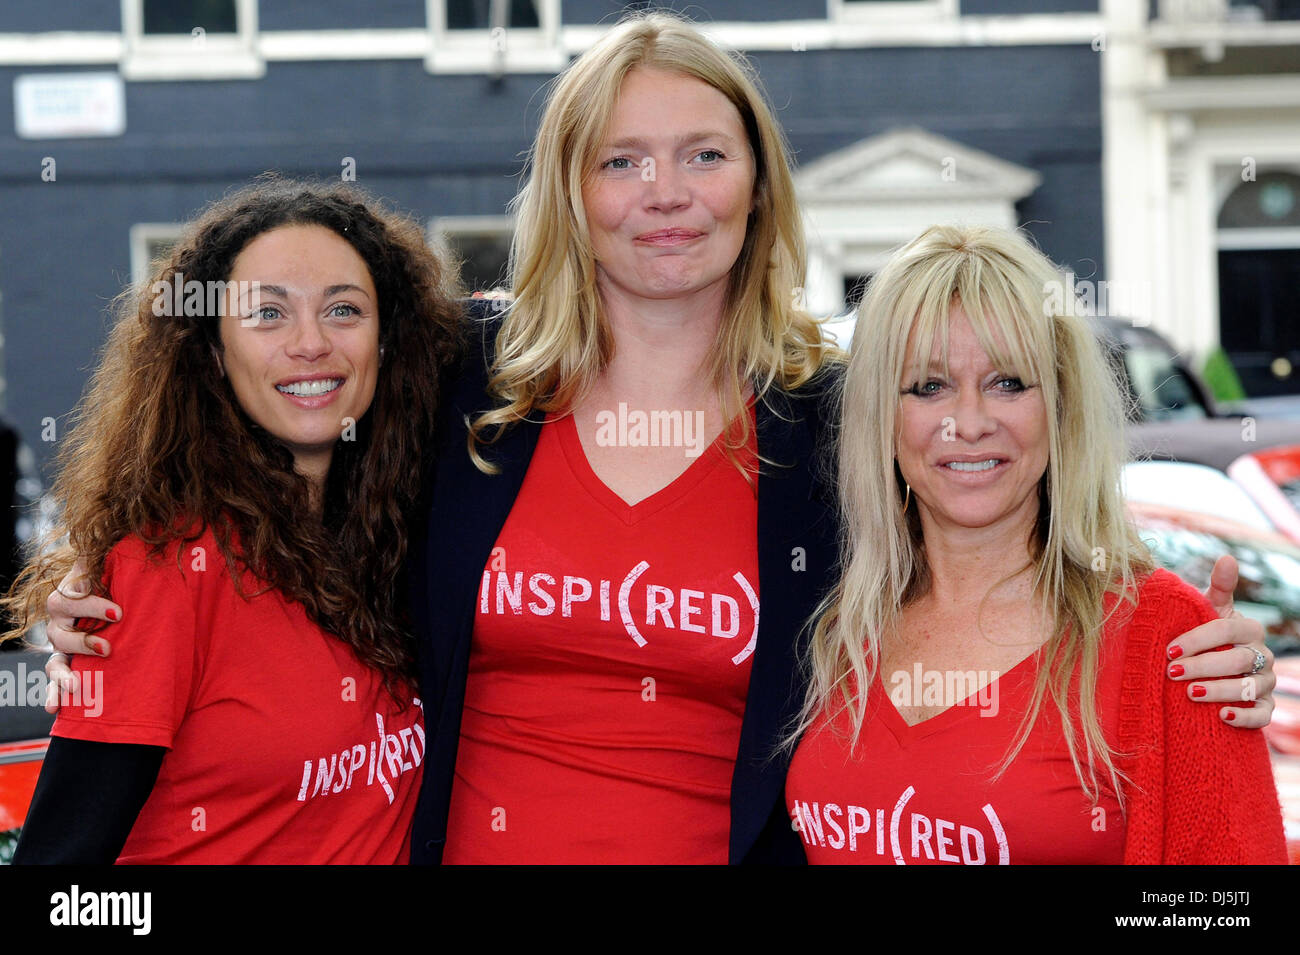 Jodie Kidd, Jo Wood, Lilly Becker The Cash & Rocket (RED) tour from London to Monte Carlo. The (RED) branded vintage and classic cars race leaves London today and ends in Monte Carlo on June 10, with stops in Paris and Milan. London, England - 07.06.12 Stock Photo